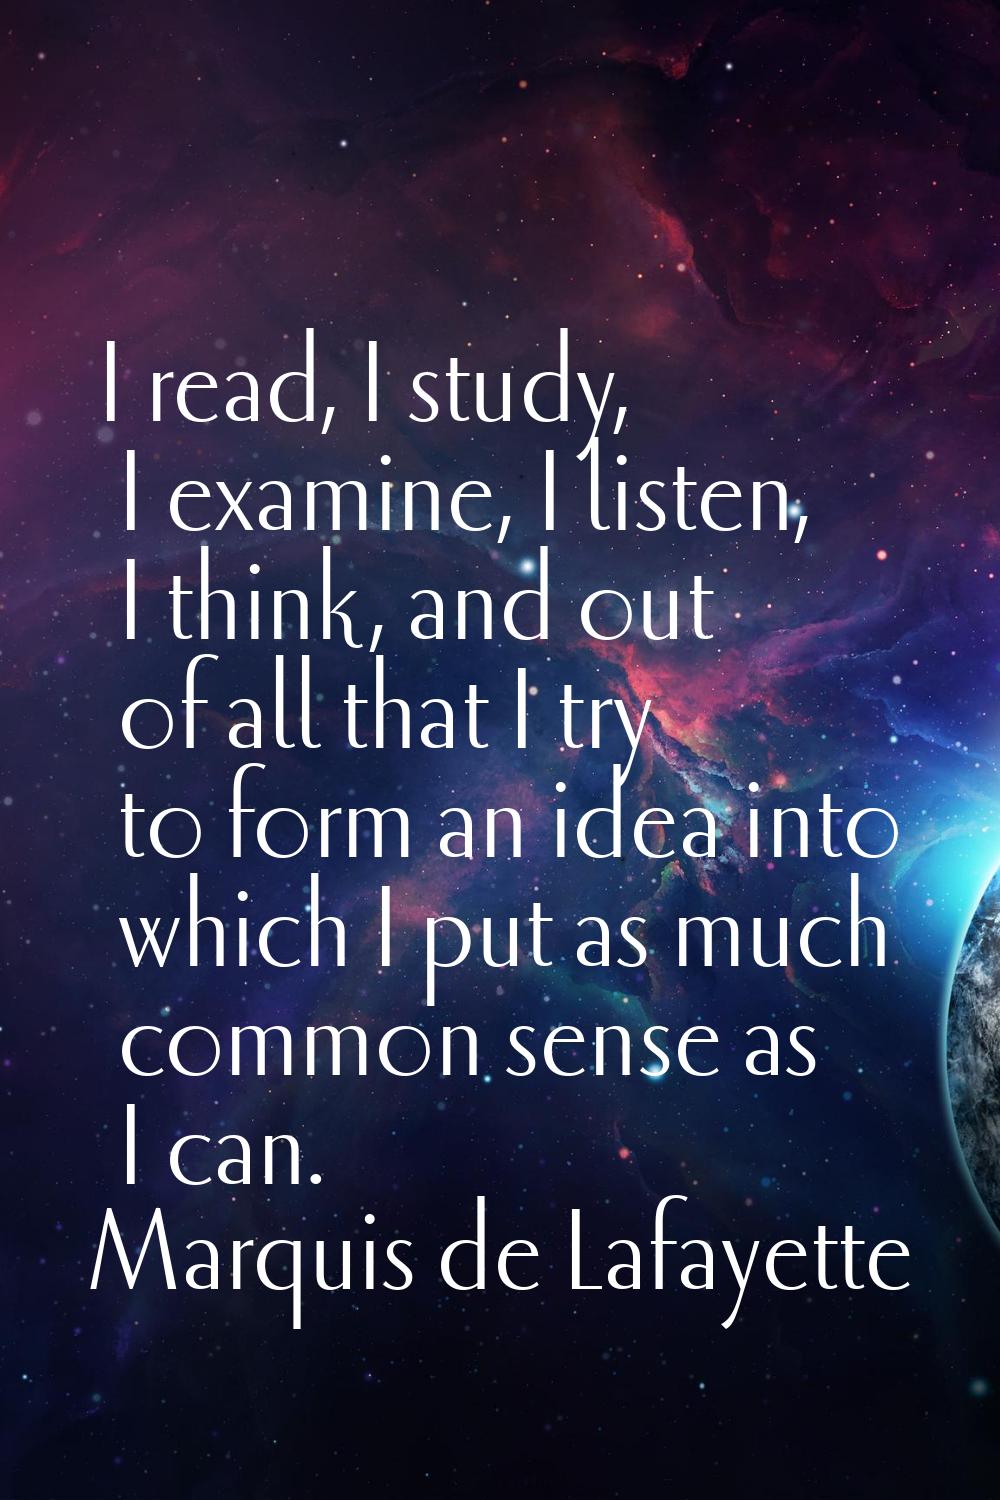 I read, I study, I examine, I listen, I think, and out of all that I try to form an idea into which